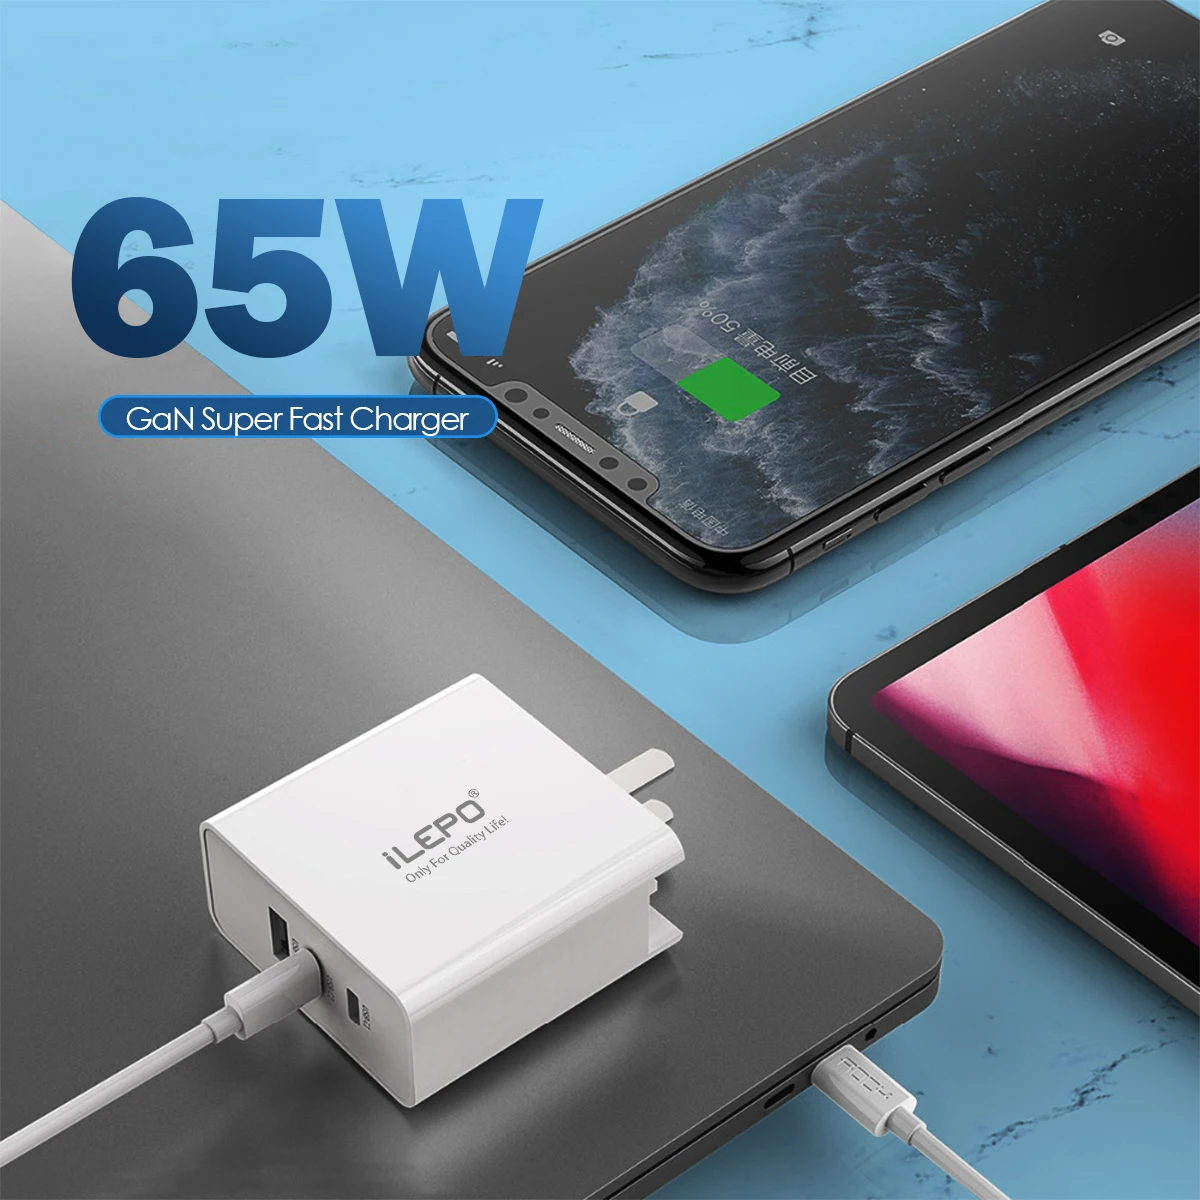 

GaN 65W USB C Charger Quick Charge 4.0 3.0 QC4.0 QC PD3.0 PD USB-C Type C Fast USB Charger For mobile phone